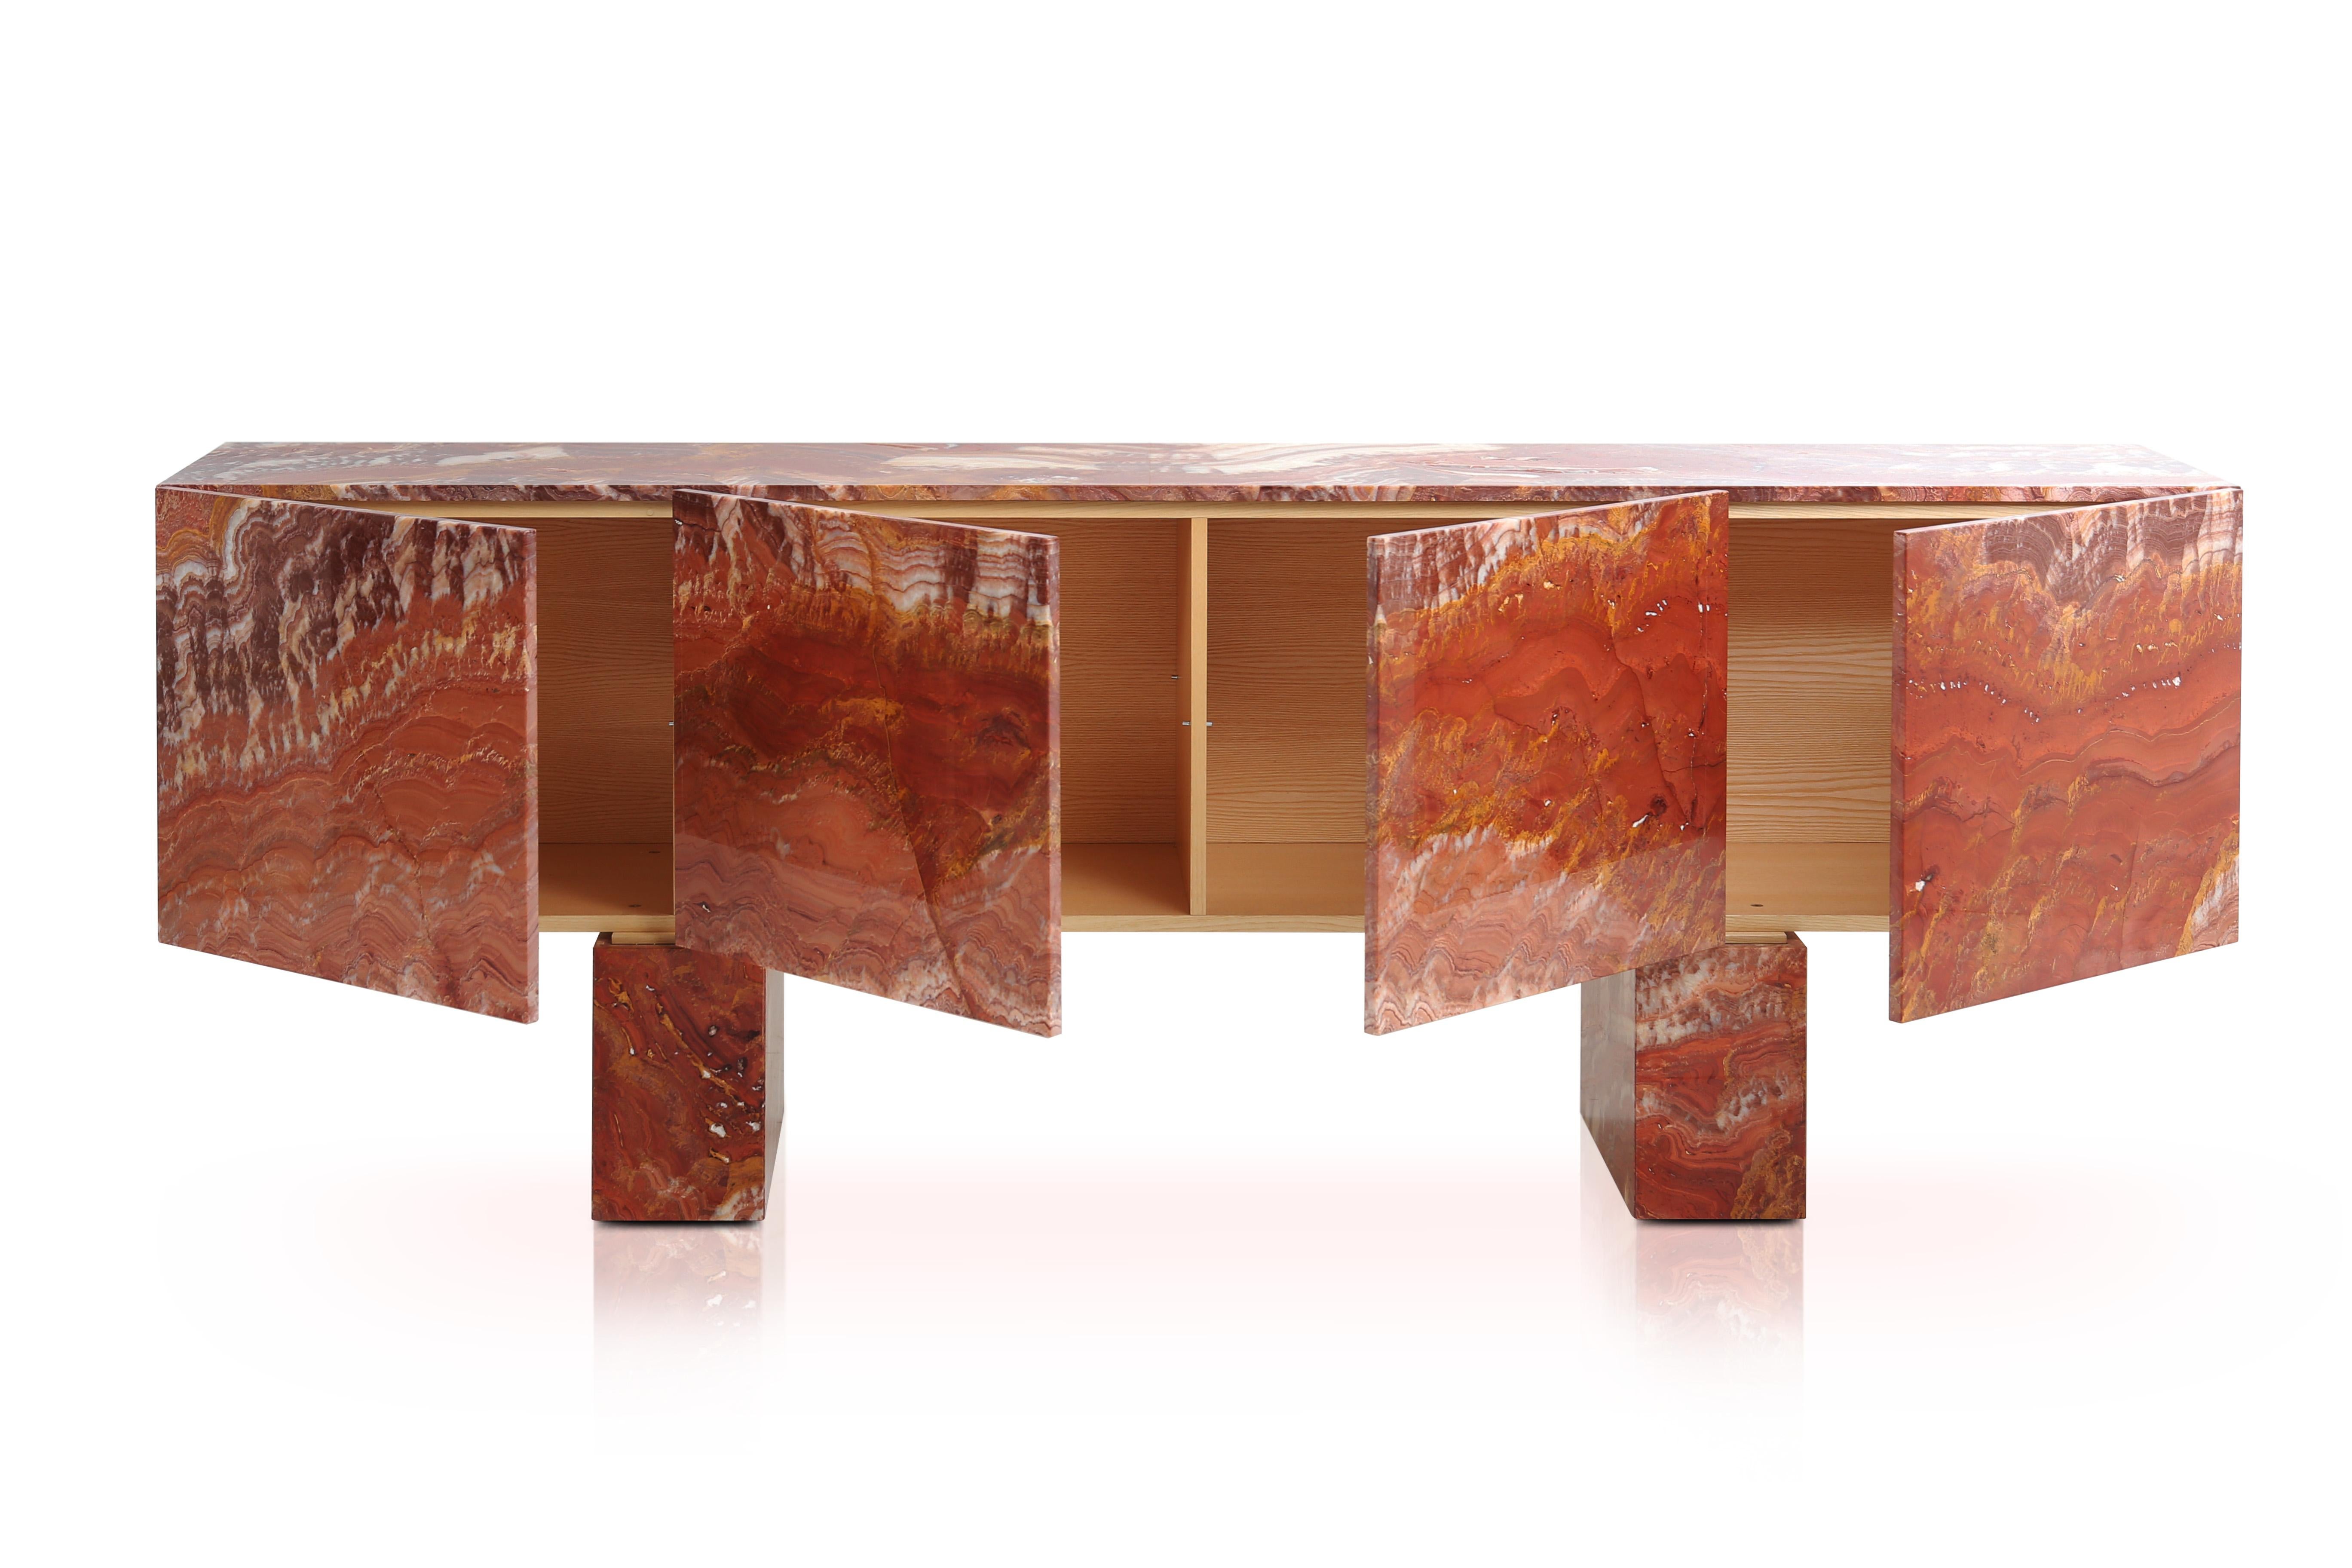 Sideboard Diablo.

The Exclusive Red Passion Onyx stone Luxury Sideboard, the perfect union of materials, a harmony of forms. A luxurious seductive piece, handcrafted by Railis Design craftsmen with superb attention to detail. This unique sideboard